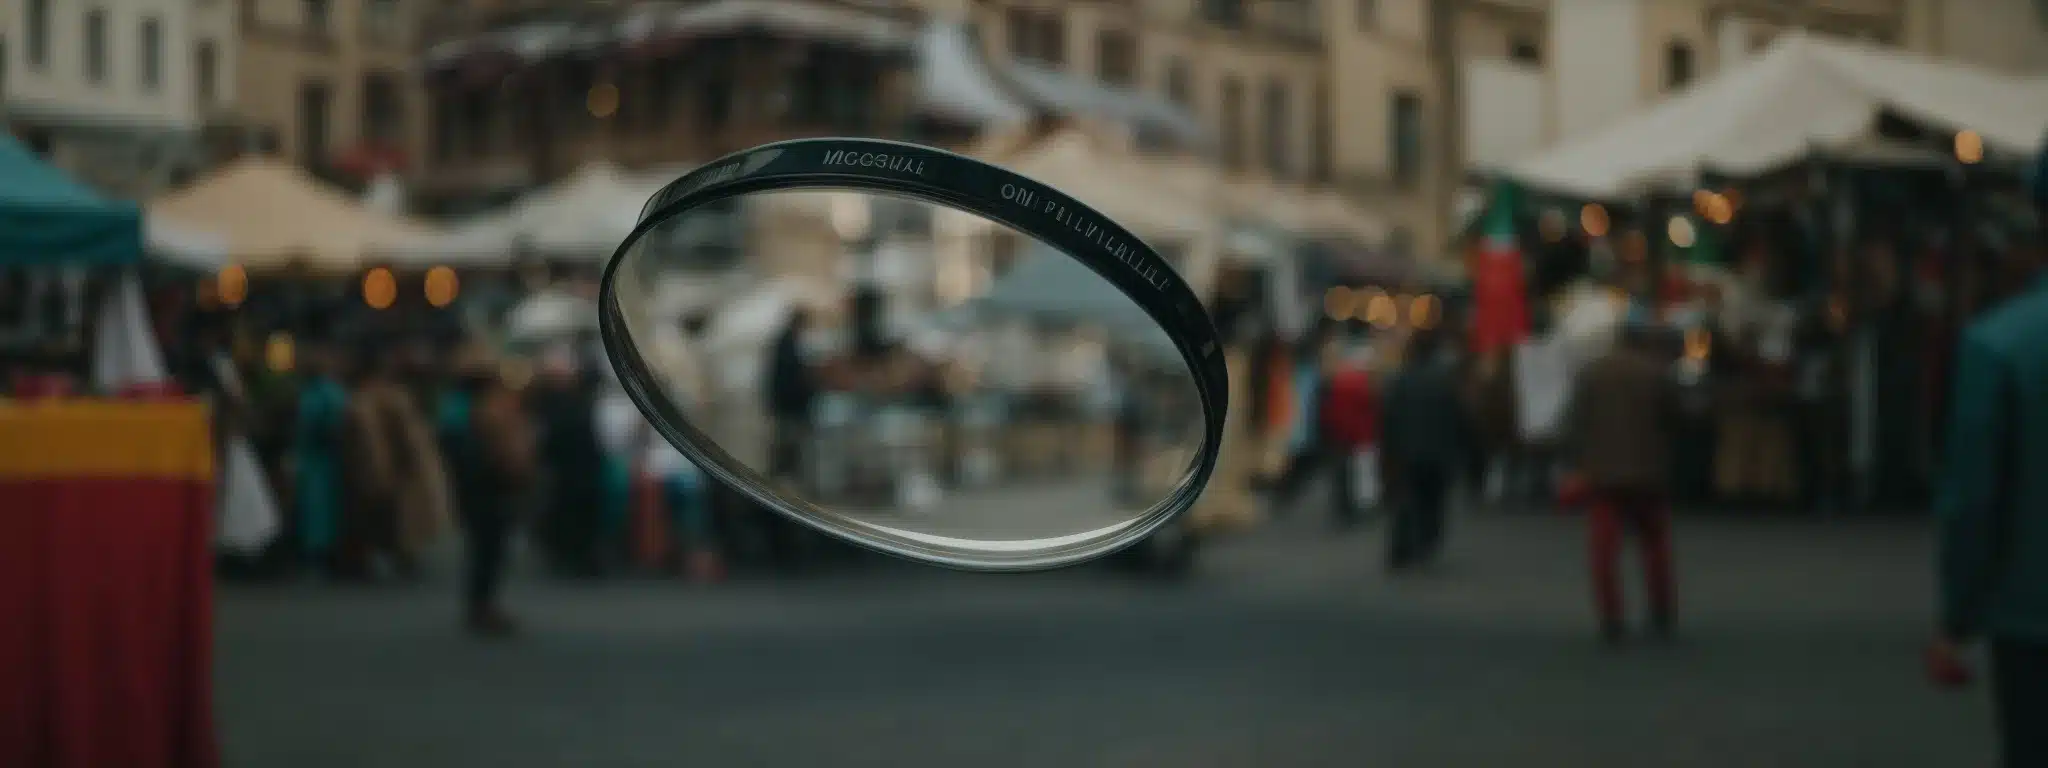 A Magnifying Glass Focused On A Polished Brand Emblem Displayed Prominently In A Bustling Market Square.